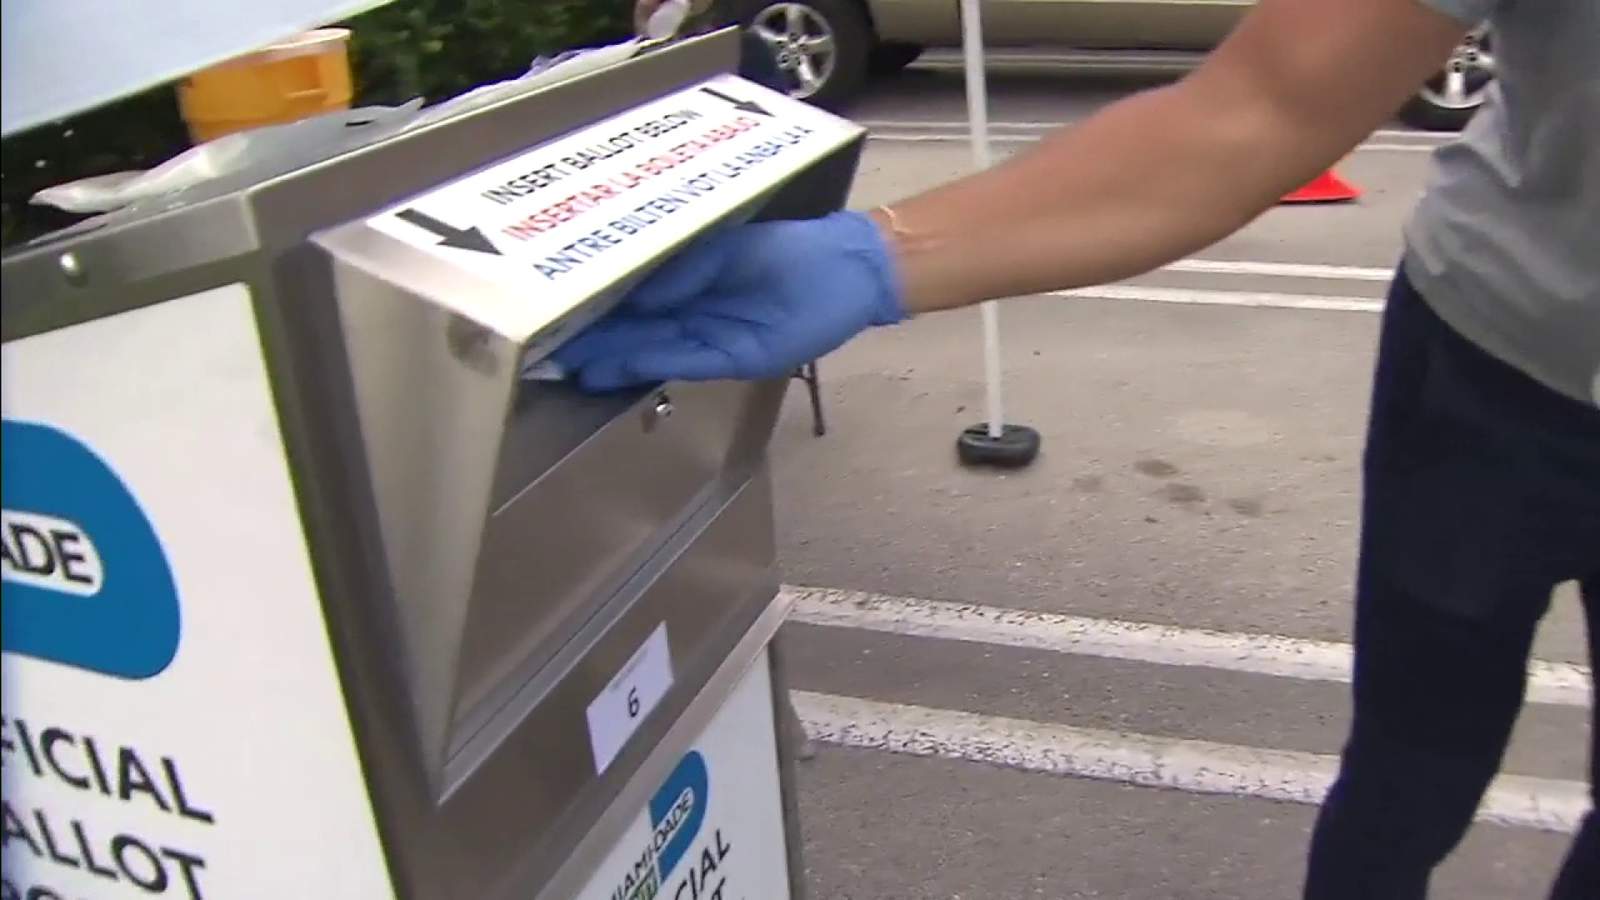 Florida Republicans push bill to make it harder to vote by mail, ban drop boxes